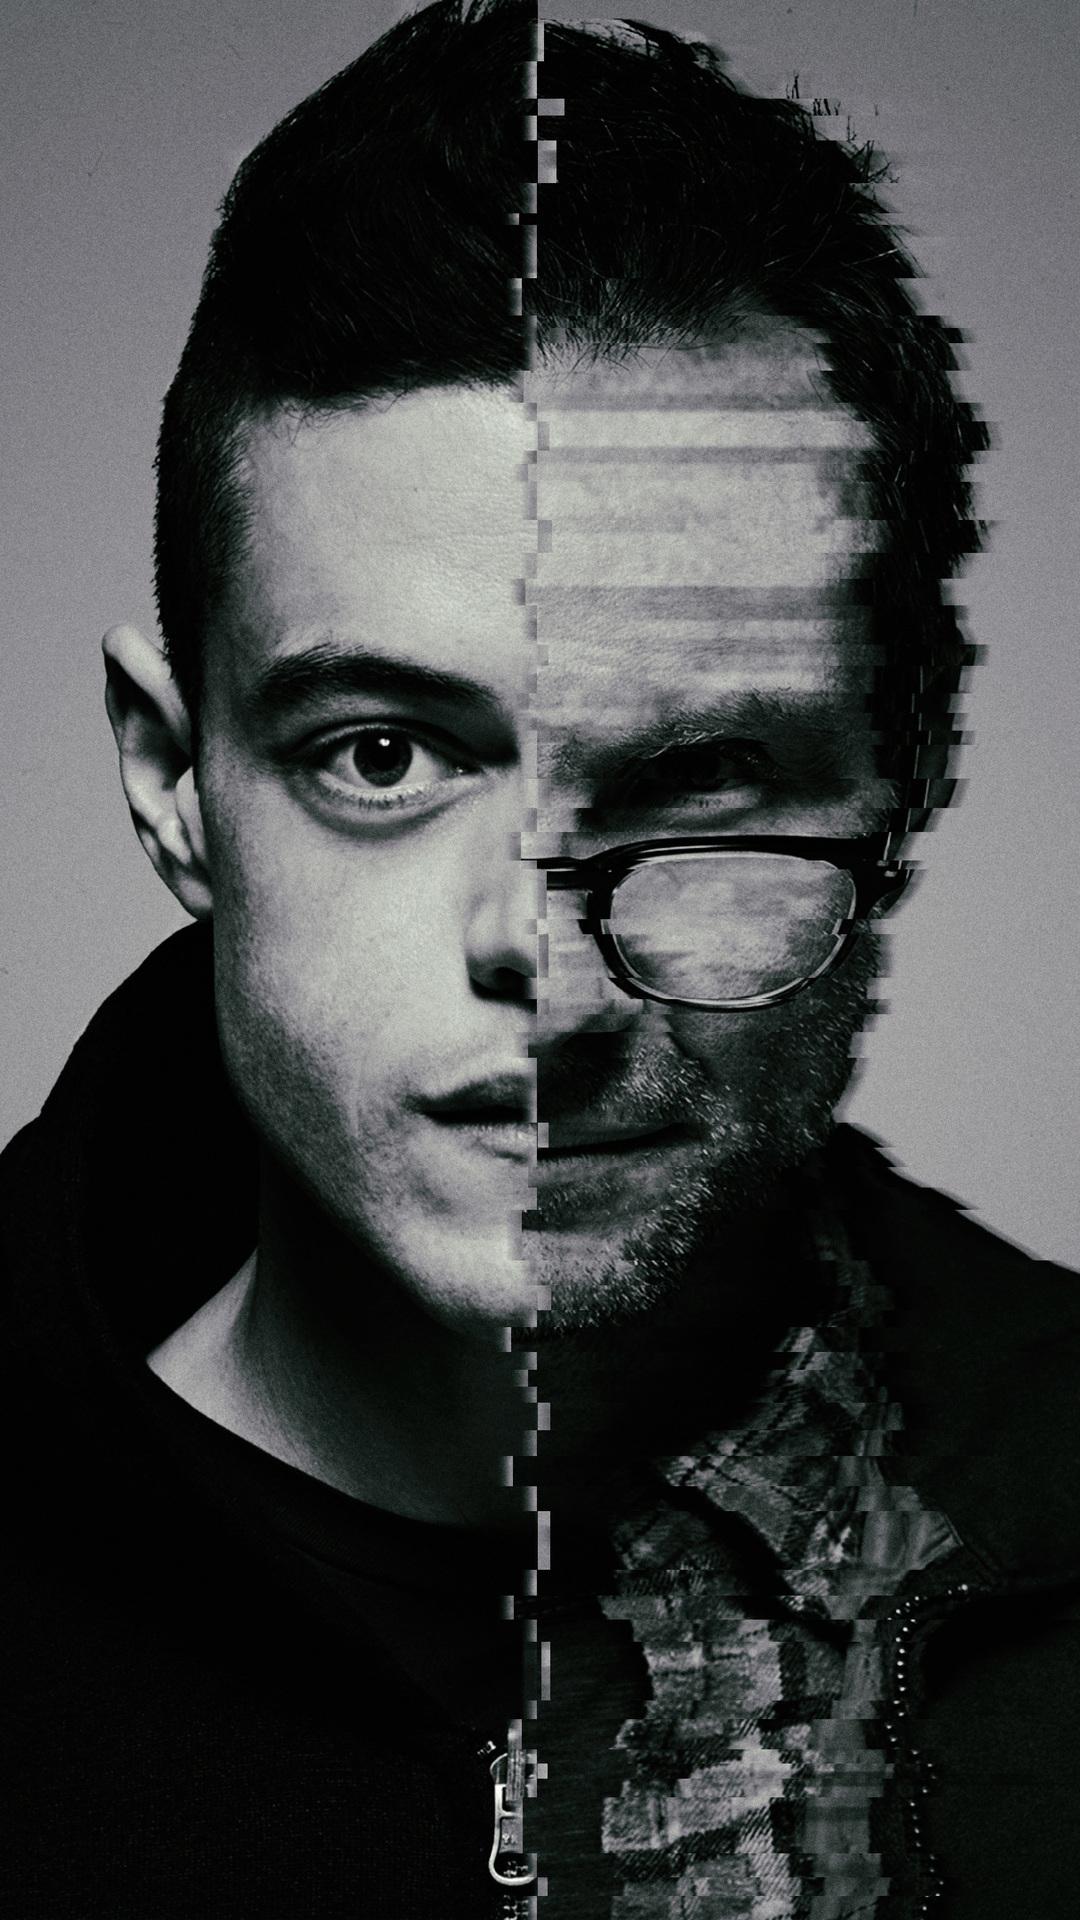 Mr robot htc one wallpaper, free and easy to download